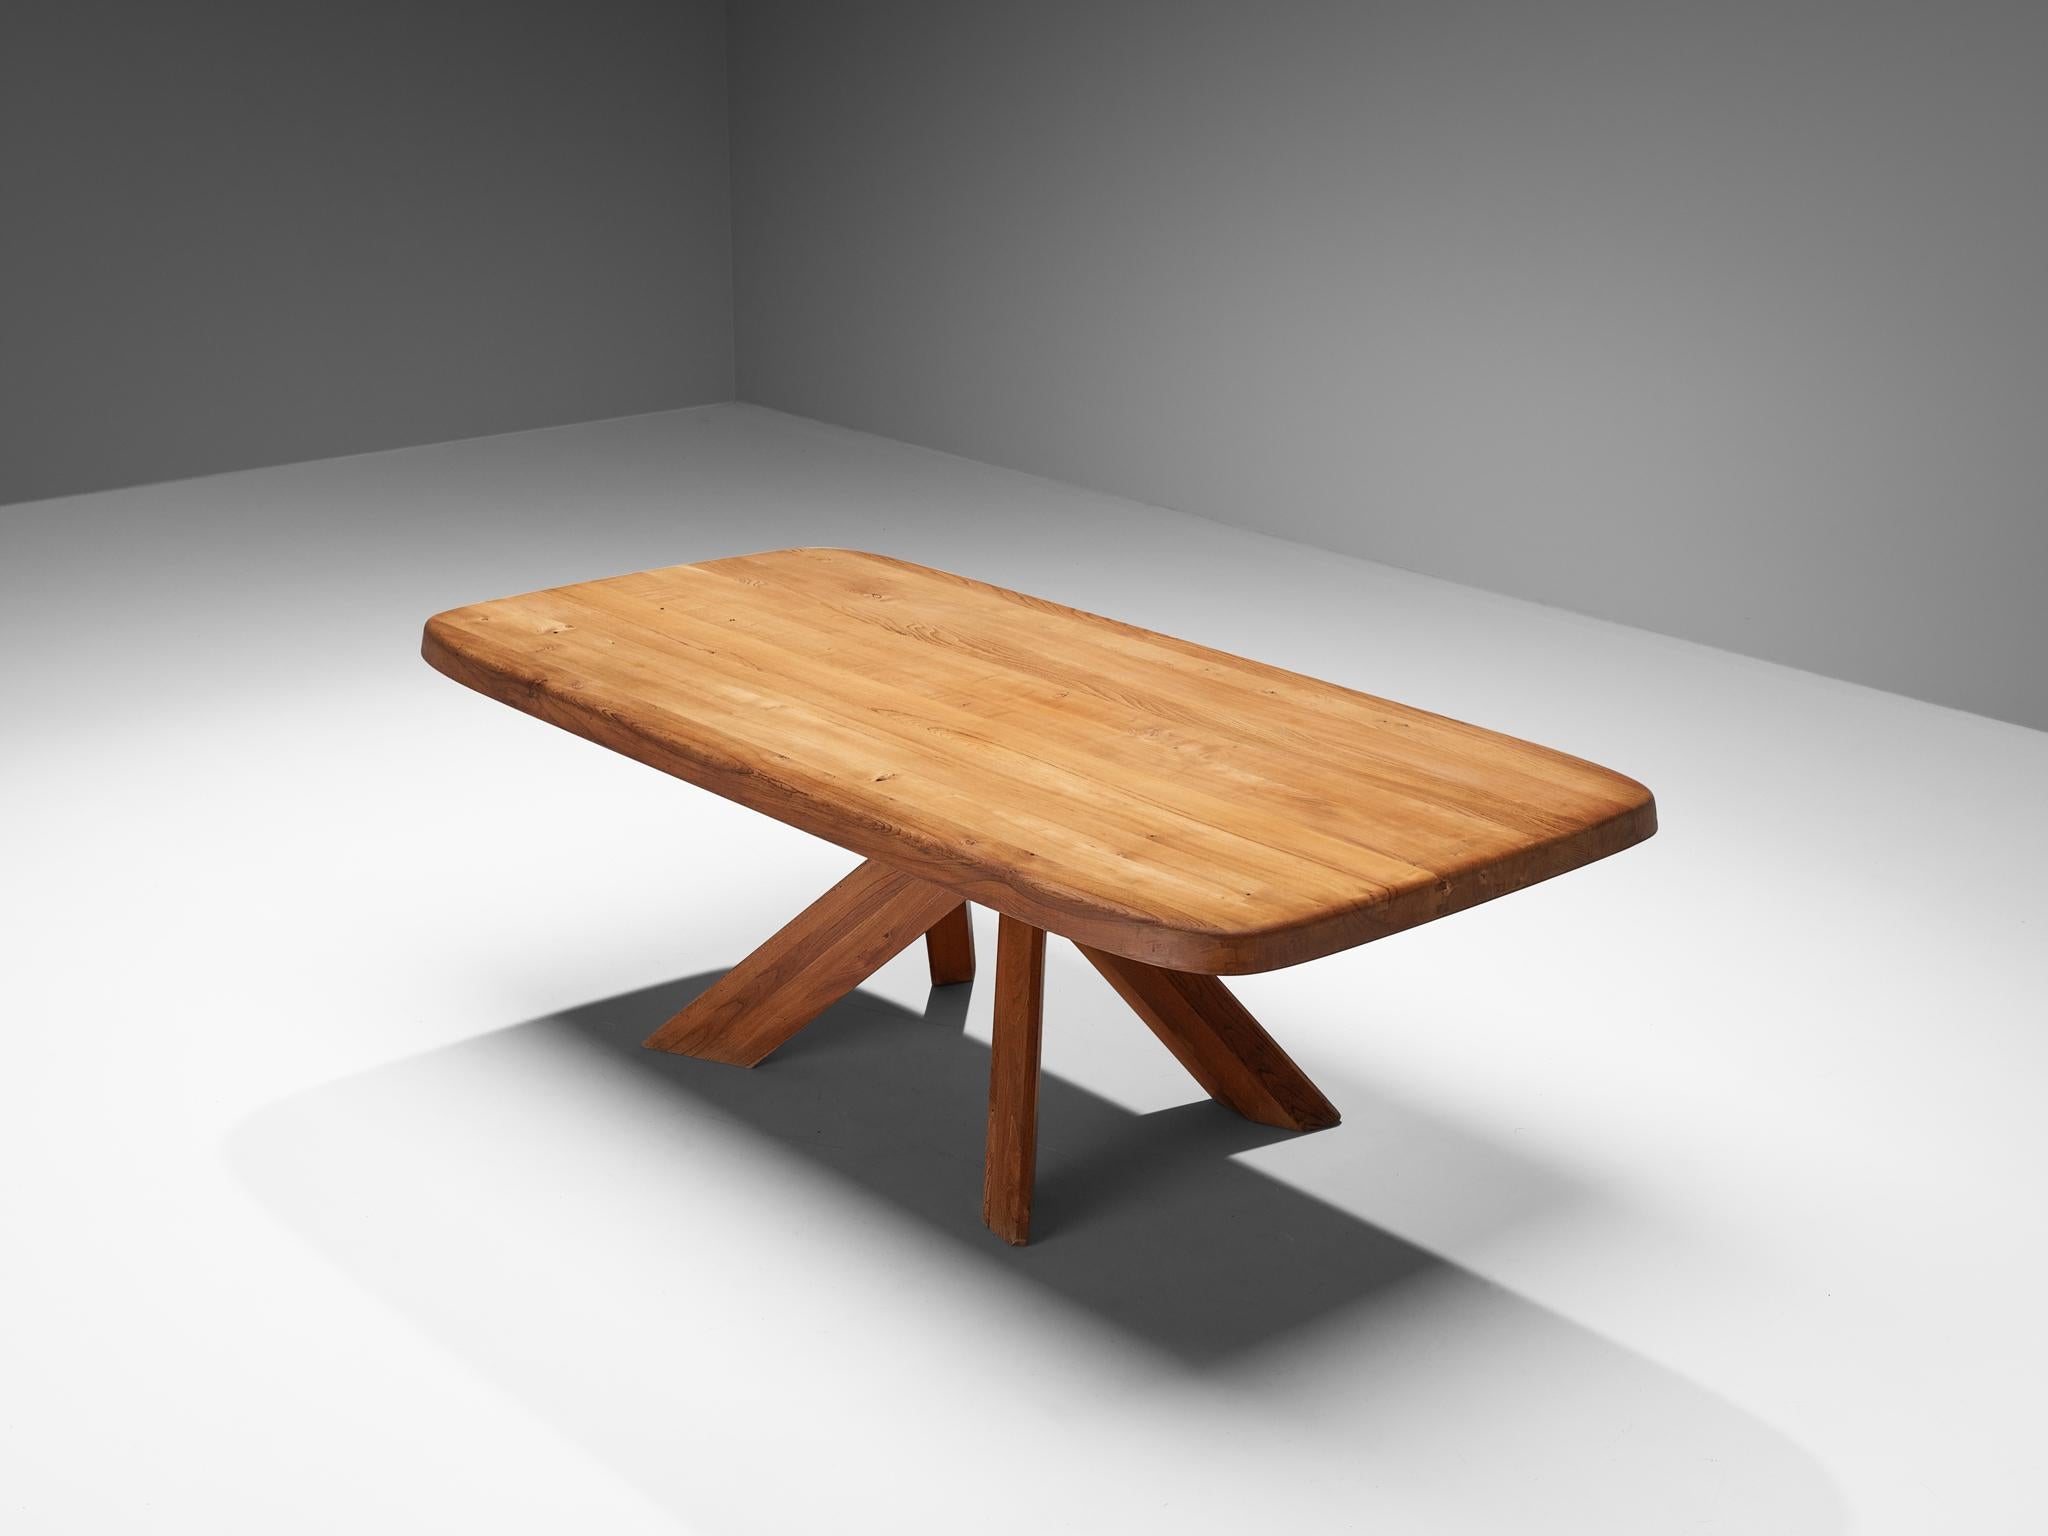 Pierre Chapo, dining table, model 'Aban T35D', solid elm, France, circa 1972 

This table is one of the early editions designed by Pierre Chapo, known for his hallmark use of solid elmwood and a commitment to pure and clean design and construction